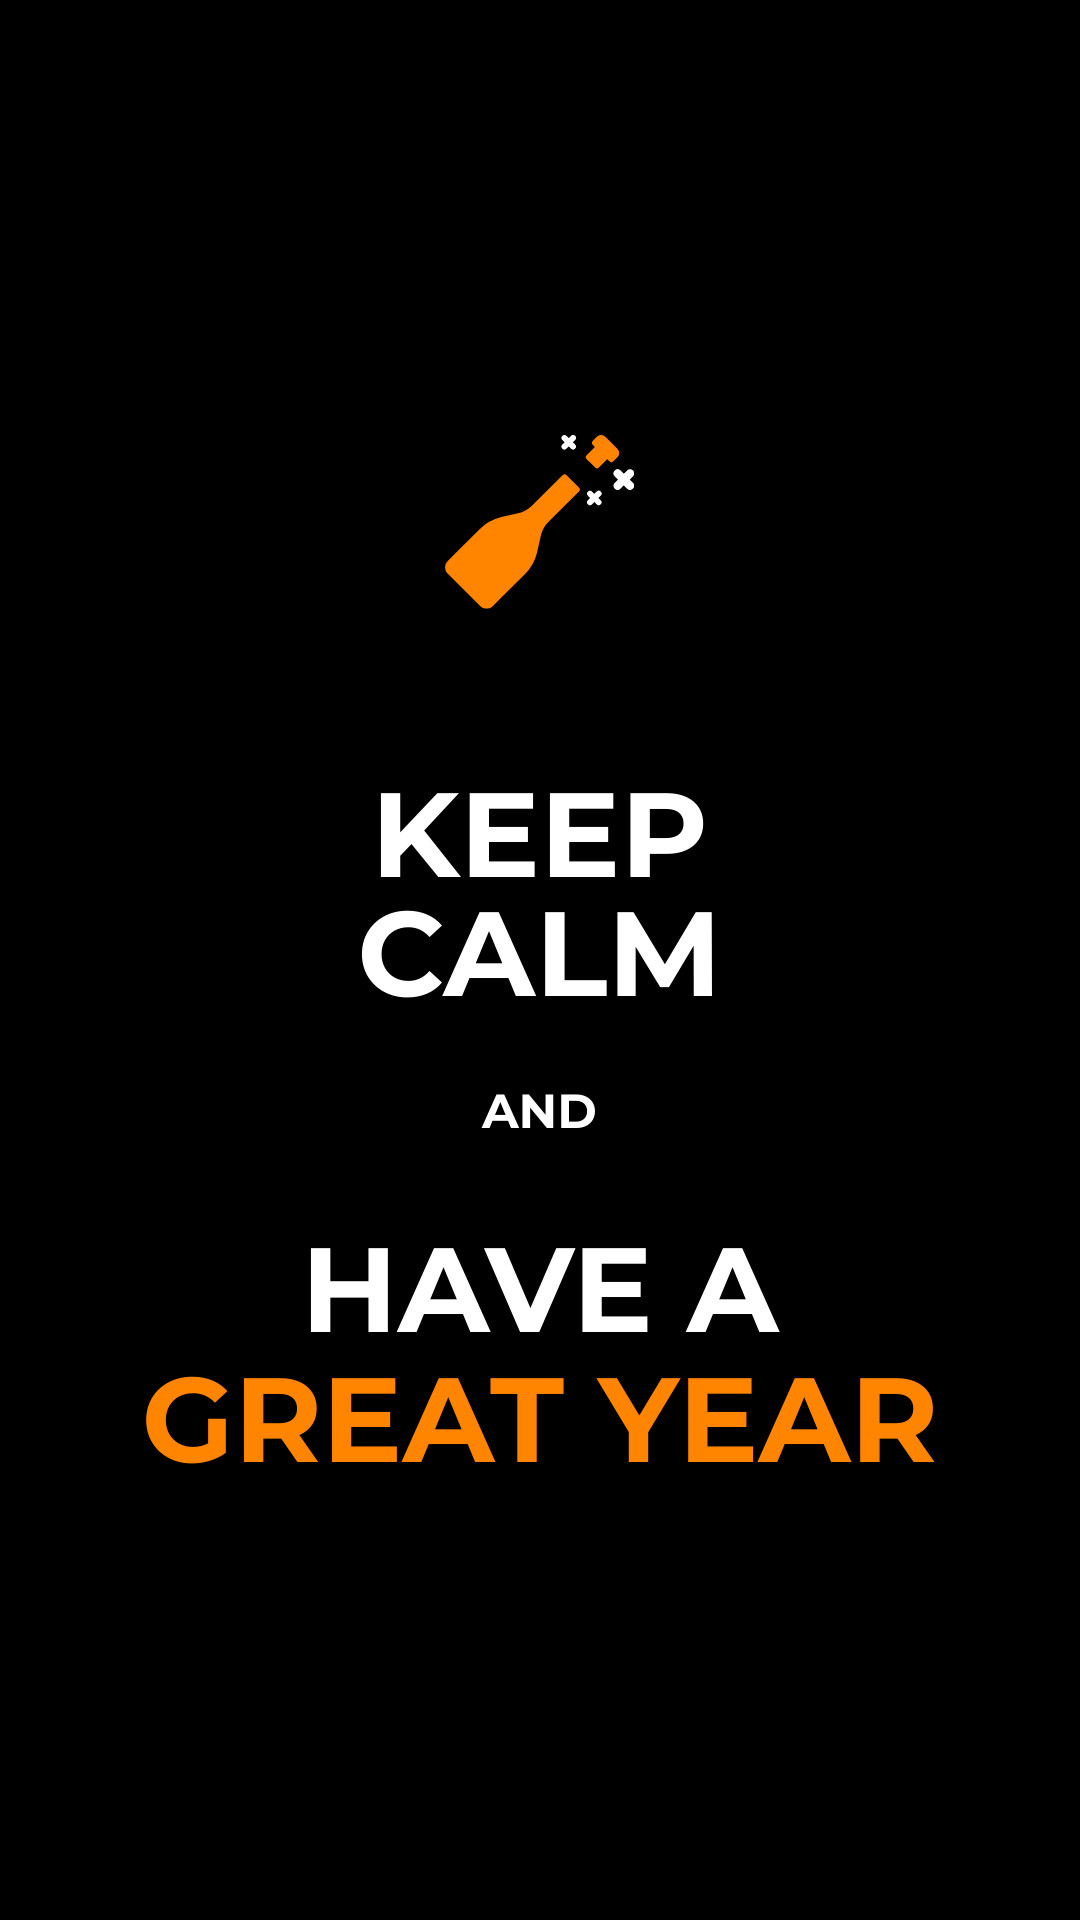 Keep Calm and Have a Great Year Facebook Cover 820x360